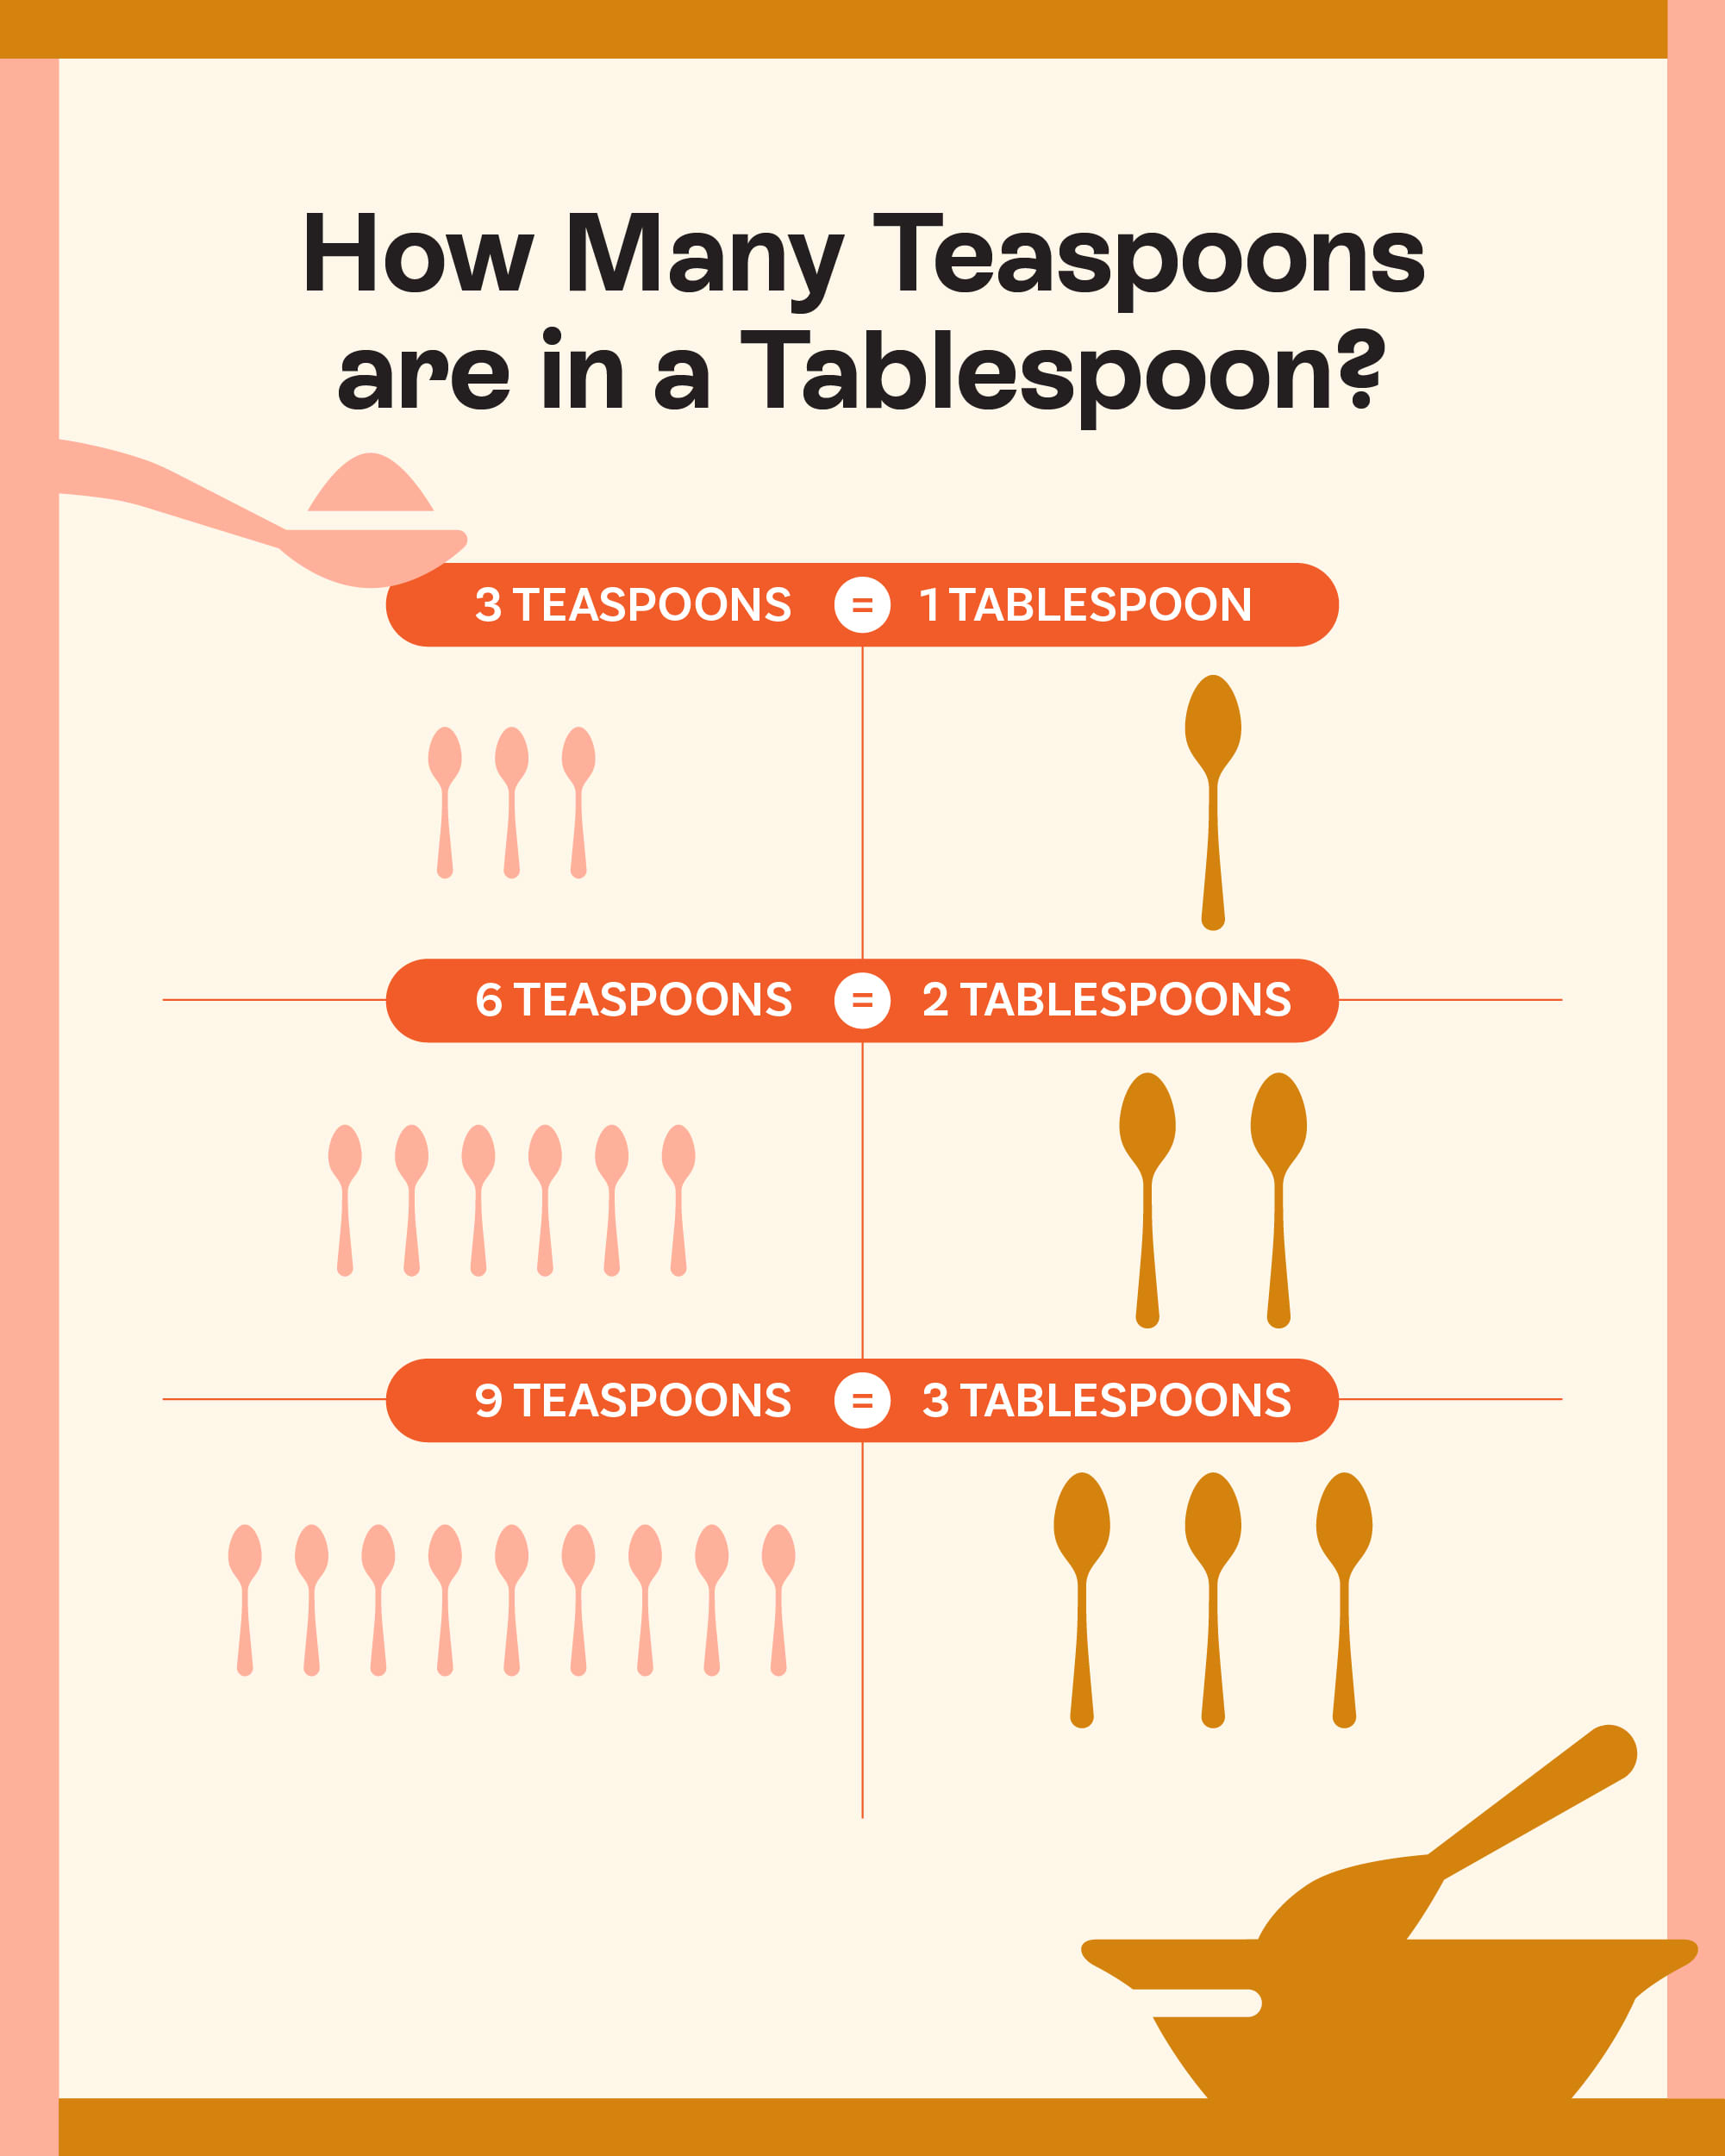 https://cdn.apartmenttherapy.info/image/upload/v1667238237/k/Design/2022-10/How-Many-Teaspoons-are-in-a-Tablespoons.jpg